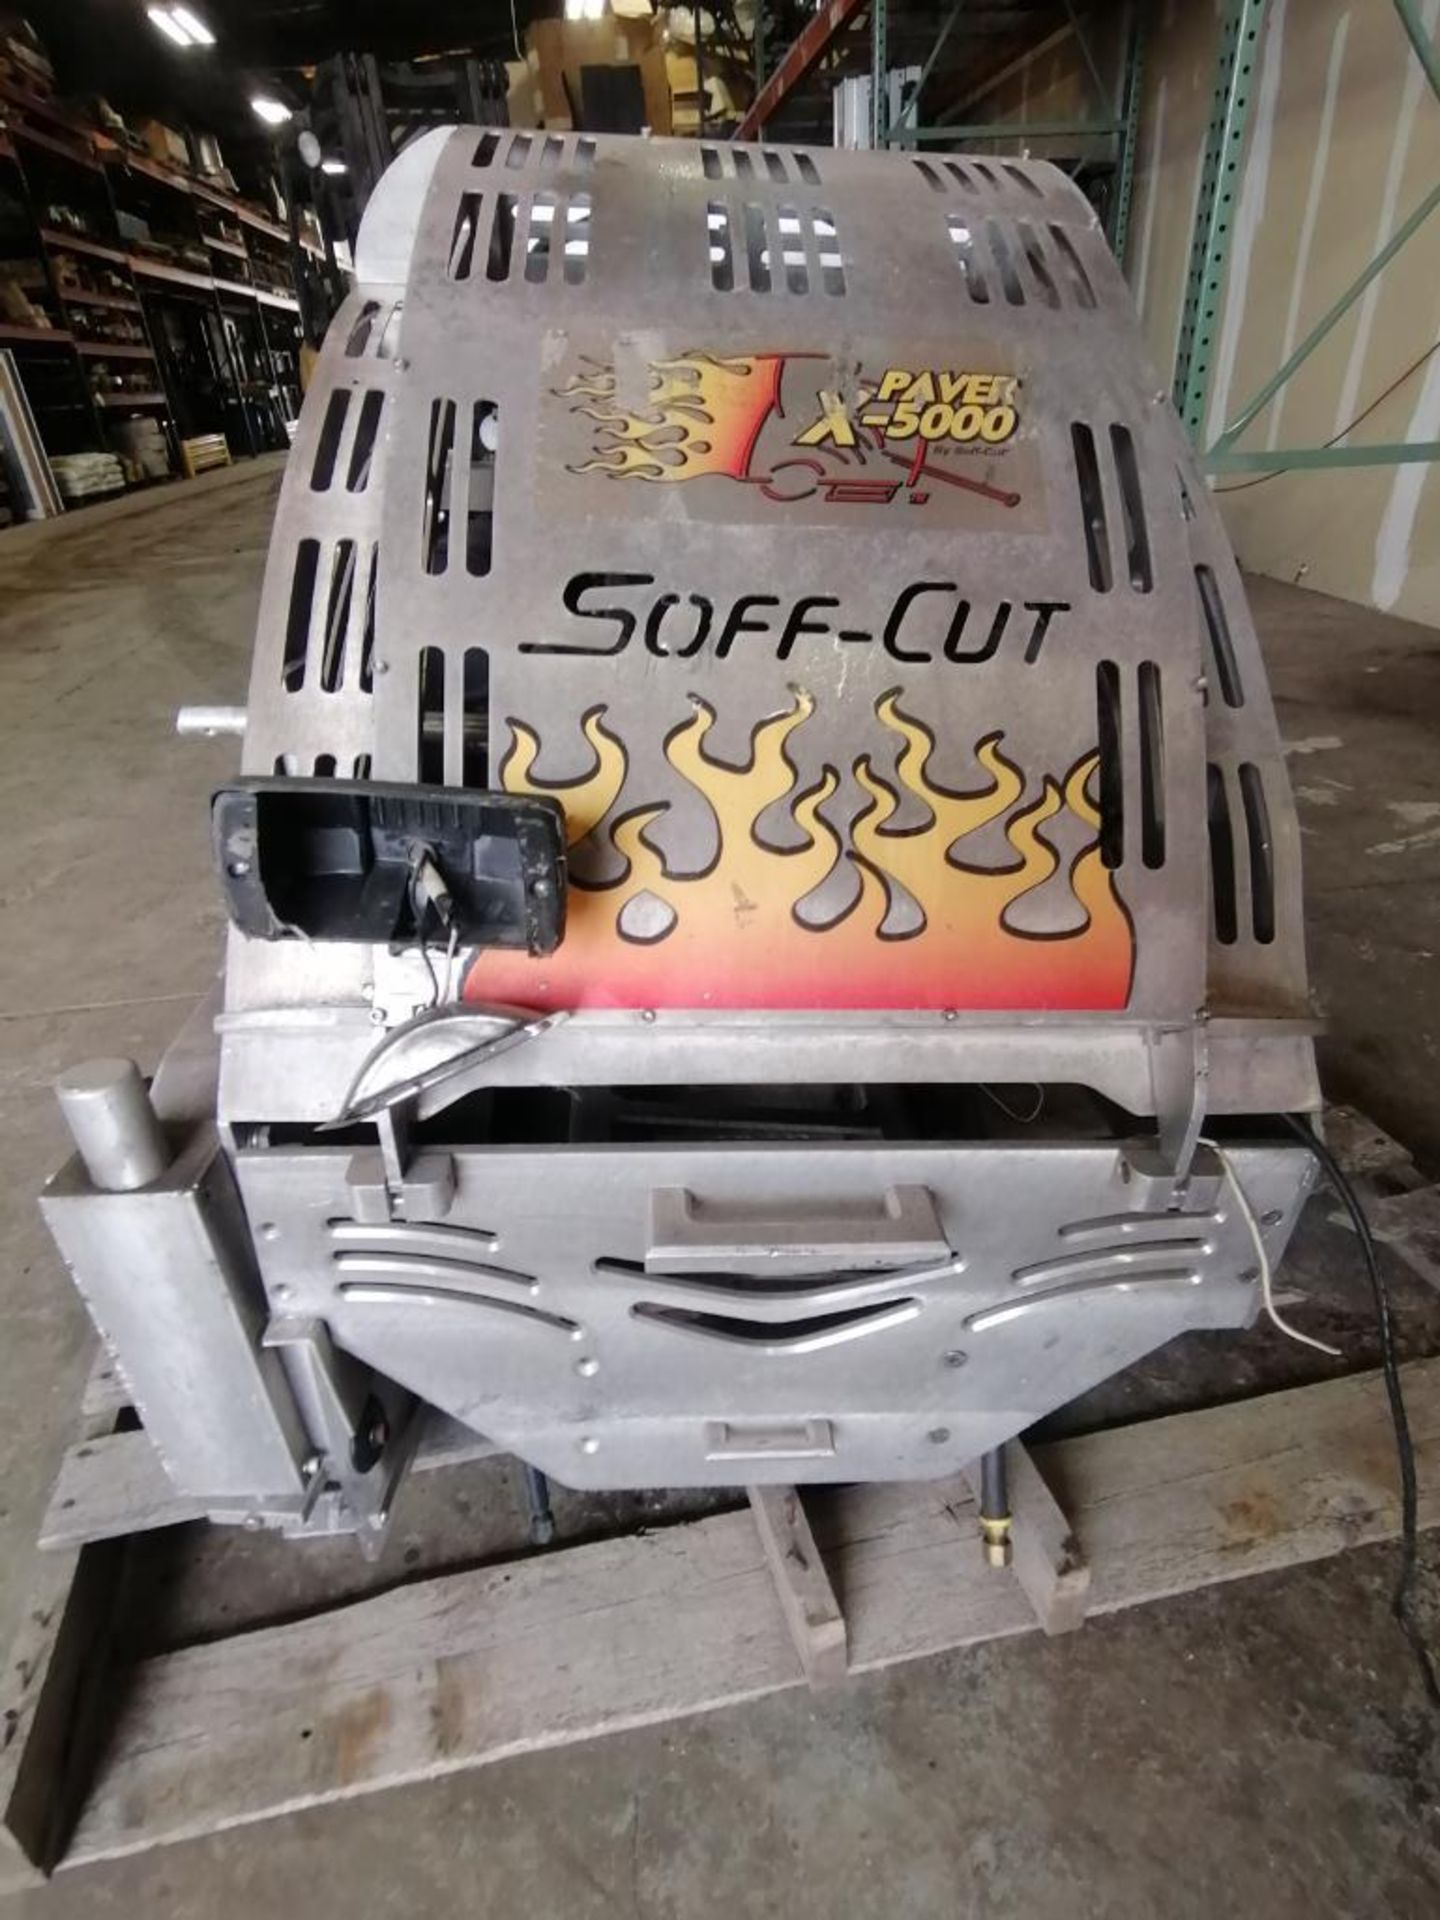 (1) Soff-Cut G2000 Walk-Behind Concrete Saw, Serial #1702 for PARTS. Located in Naperville, IL. - Image 7 of 10